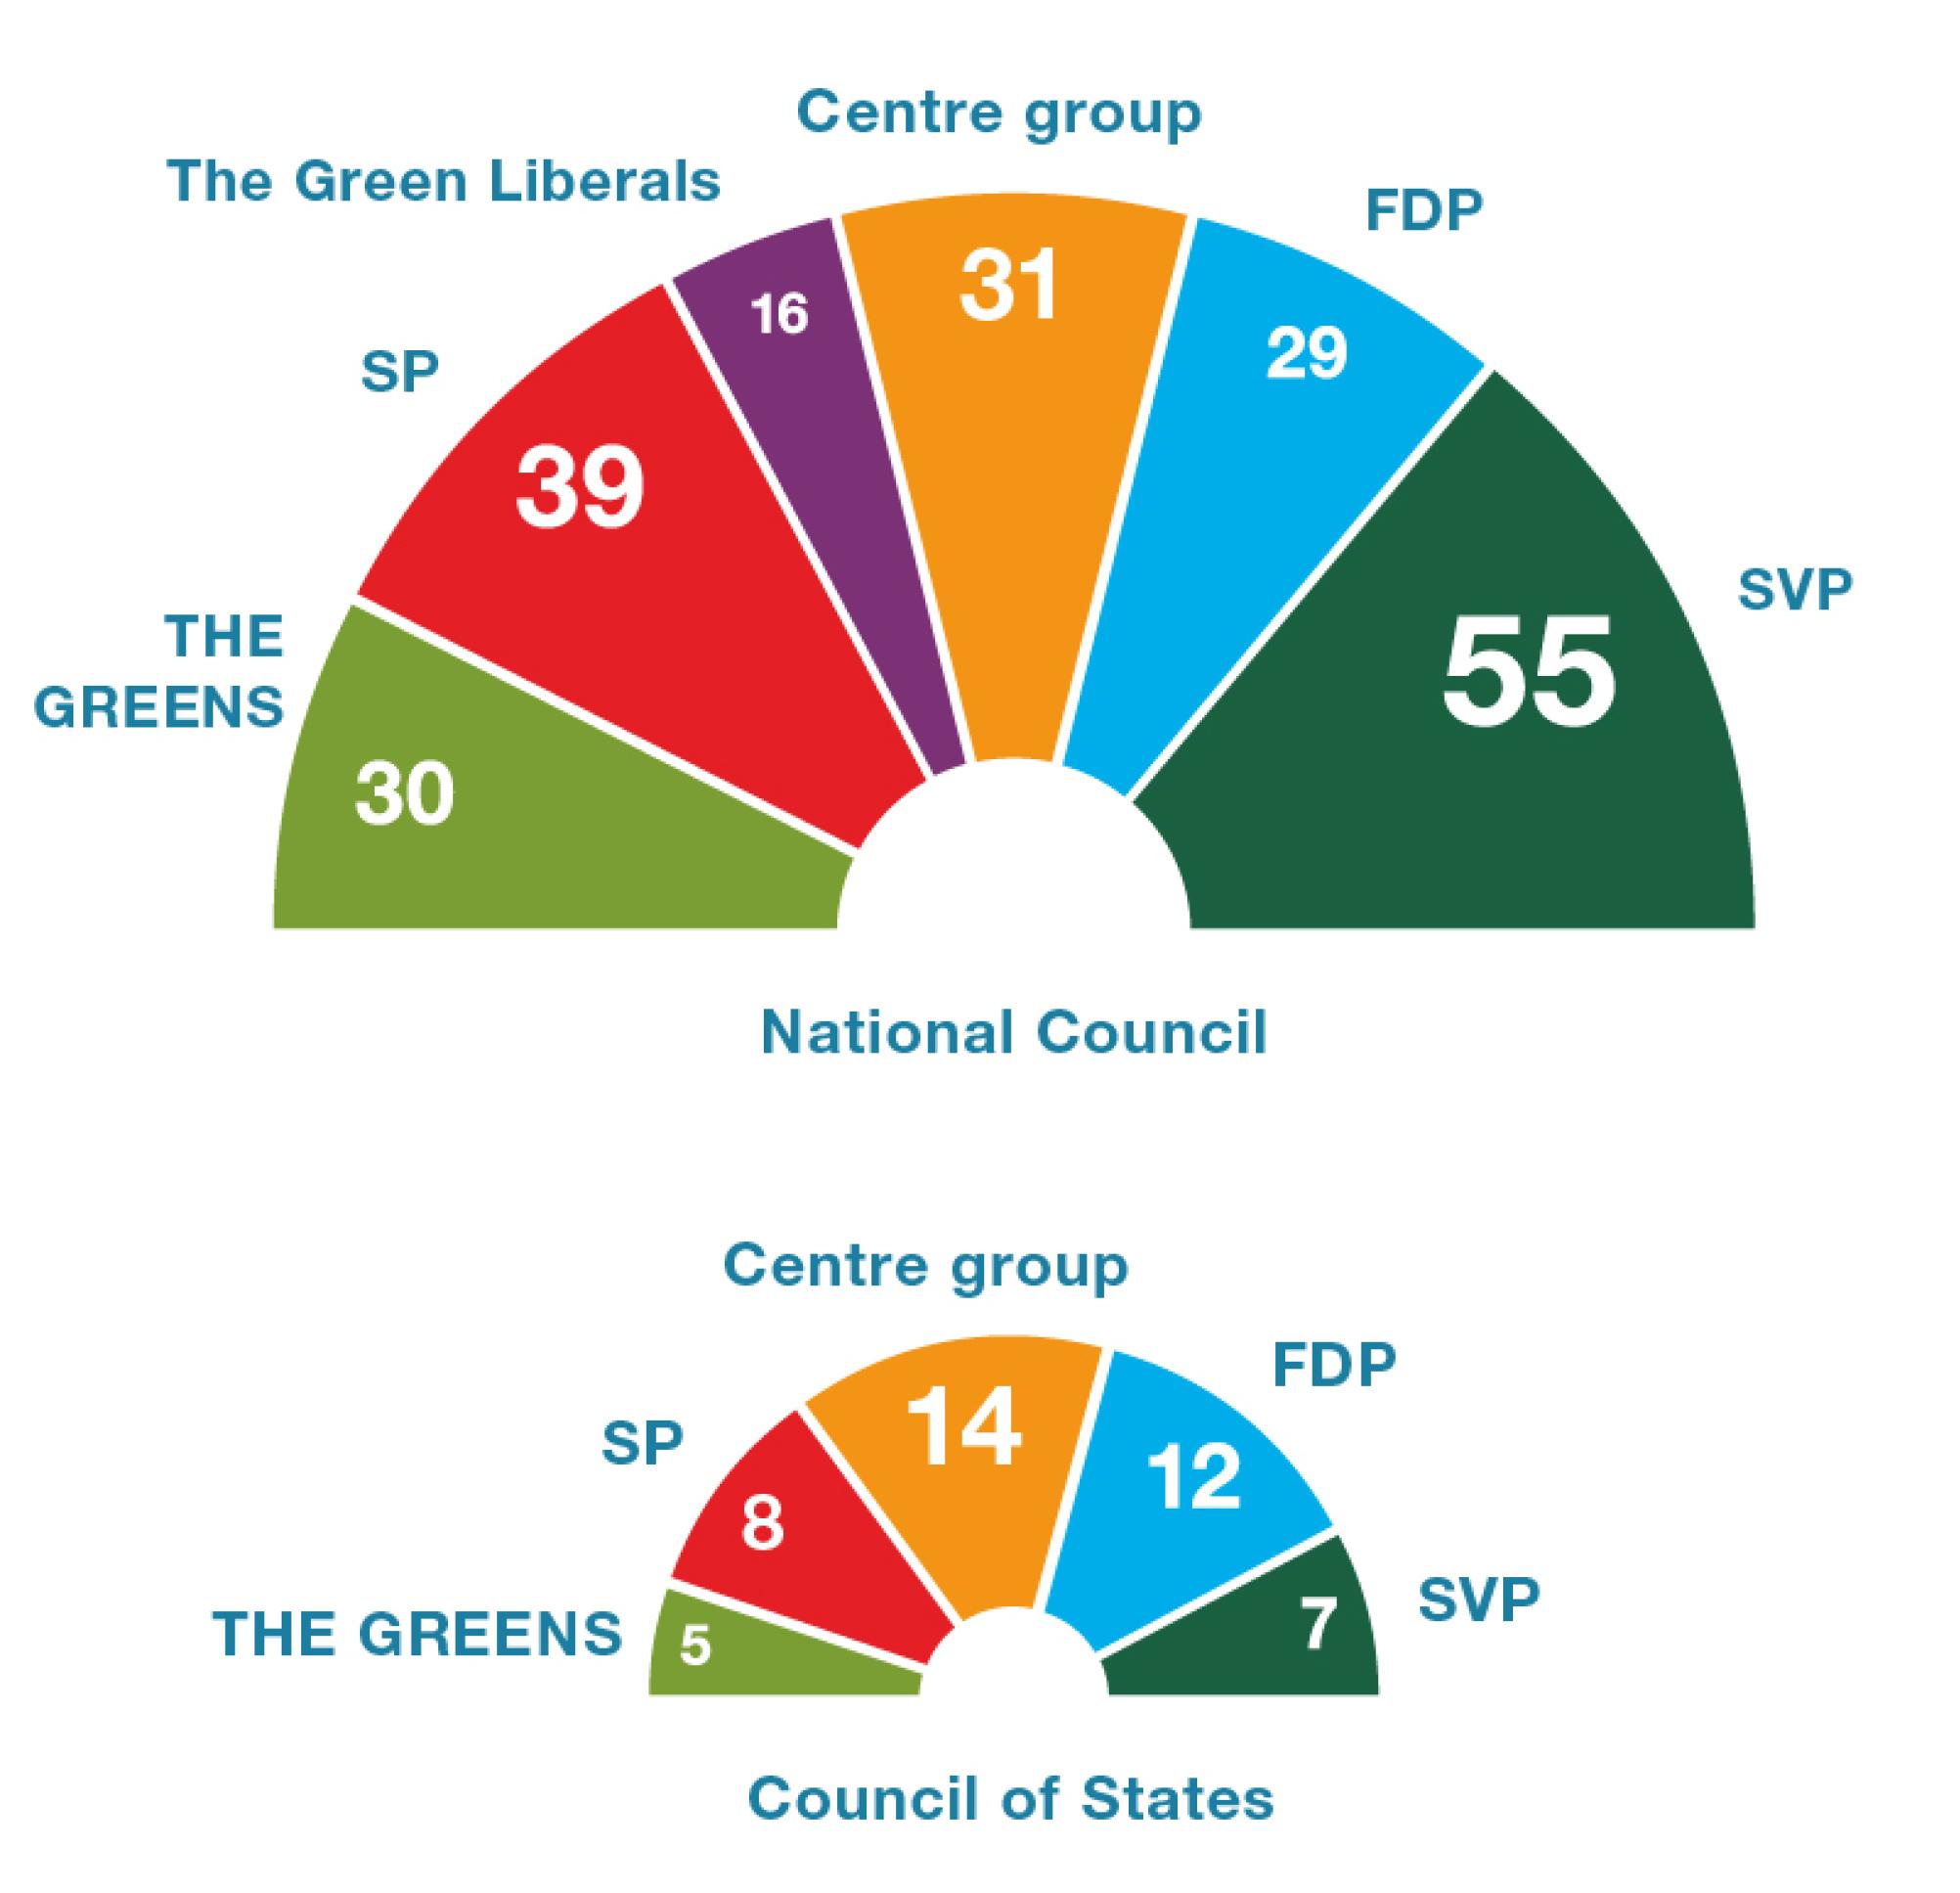 A pie chart shows the breakdown of the National Council into six parliamentary groups.  The SVP is the strongest group with 55 members.  The SP is the second largest group with 39 members.  The Centre group has 31 members; the Greens, 30 members; and the FDP, 29 members.  The smallest group is the Green Liberals with 16 members.  Another pie chart shows the breakdown of the Council of States into five parliamentary groups.  The strongest groups are the Centre group with 14 members and the FDP with 12 members.  The SP has 8 members, the SVP, 7 members; and the Greens, 5 members.